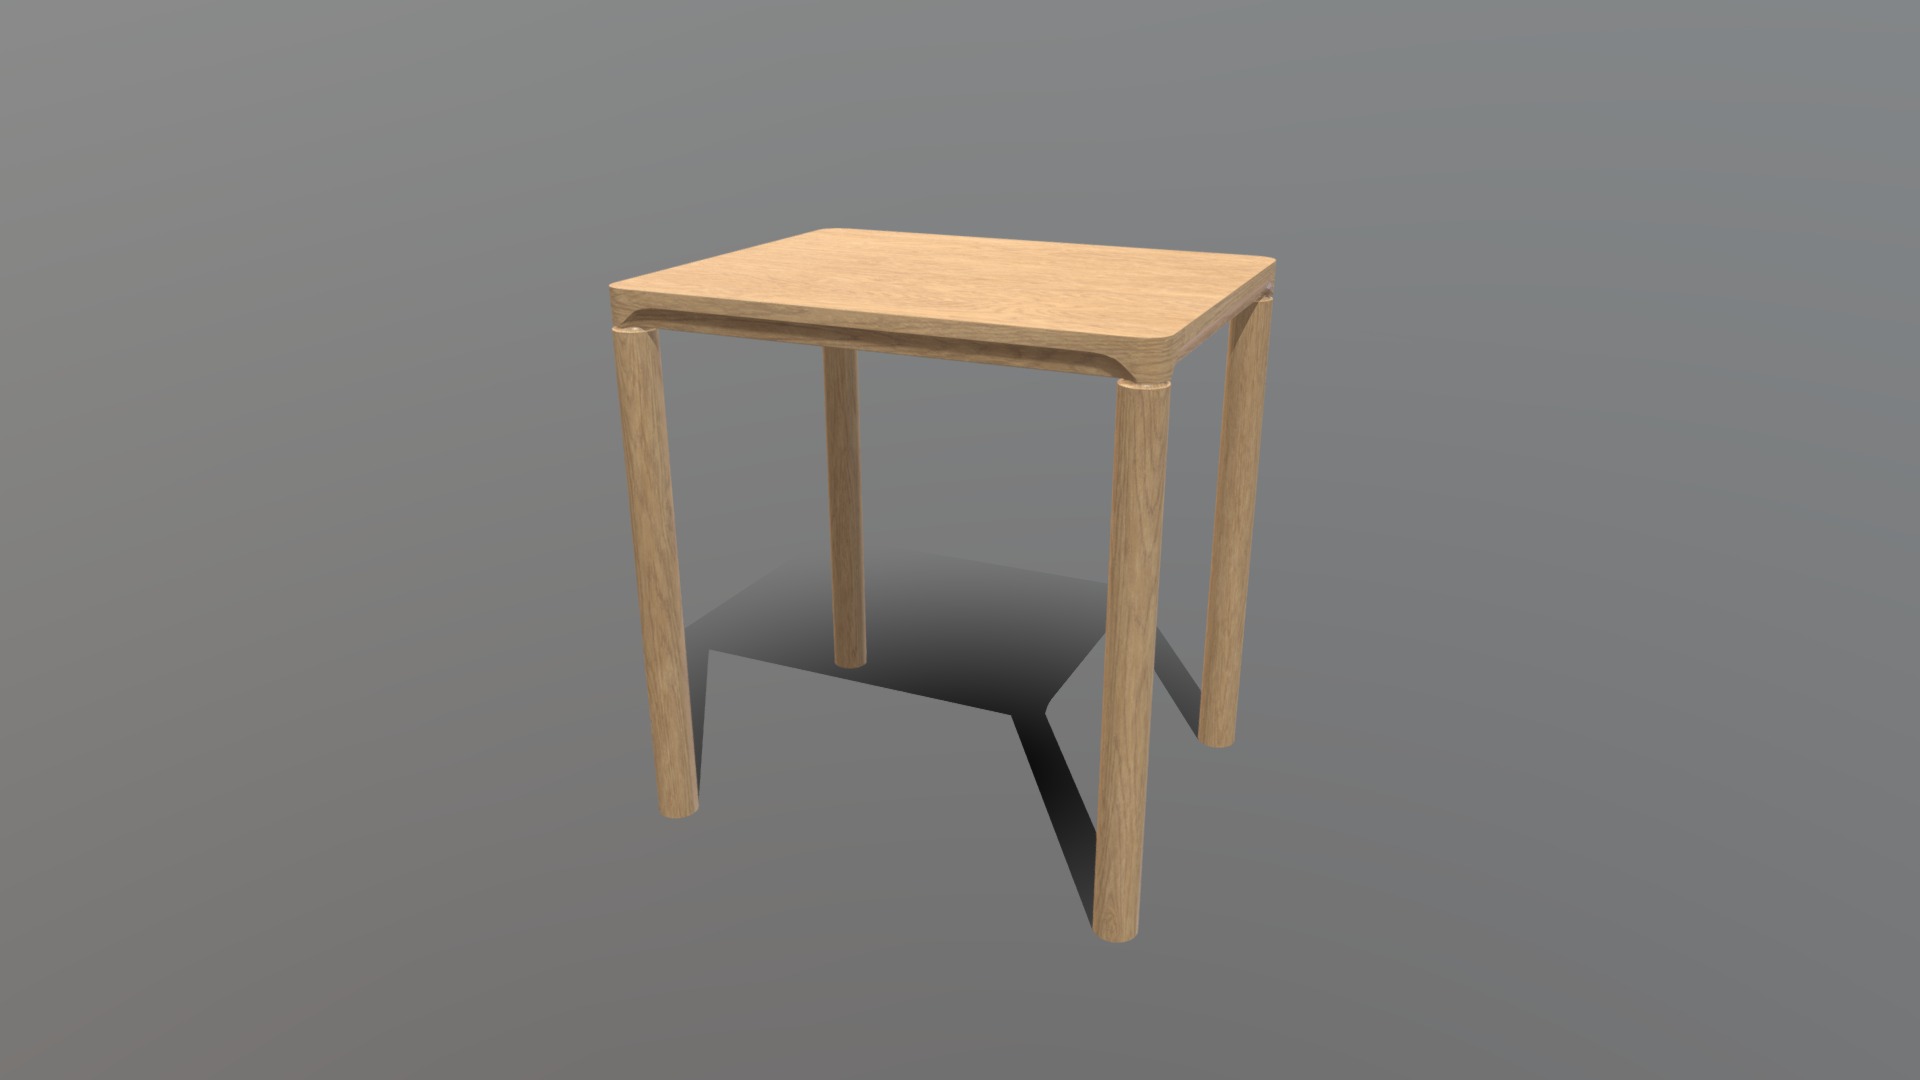 3D model Piloti Table-Wood oak veneer - This is a 3D model of the Piloti Table-Wood oak veneer. The 3D model is about a wooden table with legs.